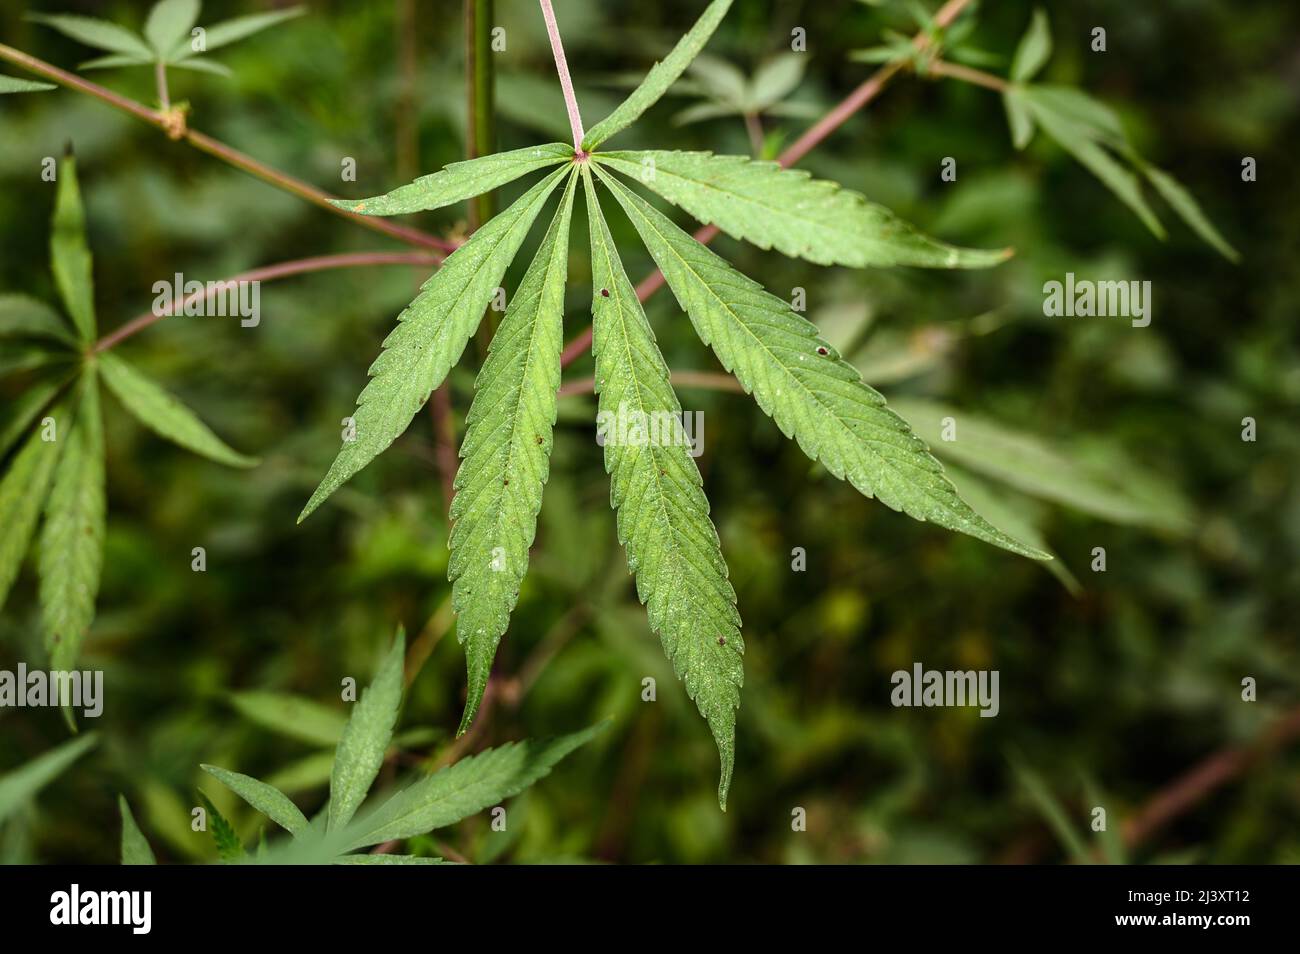 A newly grown Cannabis Plant at Nadia, West Bengal. Cannabis in India has been a very strong mythical and medicinal relationship, known to be used at least as early as 2000 BCE. It has been used by humans throughout recorded history for its food, fibre and medicine. In Indian society, common terms for cannabis preparations include charas (resin), ganja (flower), and bhang (seeds and leaves). The central law that deals with cannabis (weed or marijuana) in India is the Narcotic Drugs and Psychotropic Substances Act, 1985 which restricts Cannabis cultivation. India. Stock Photo